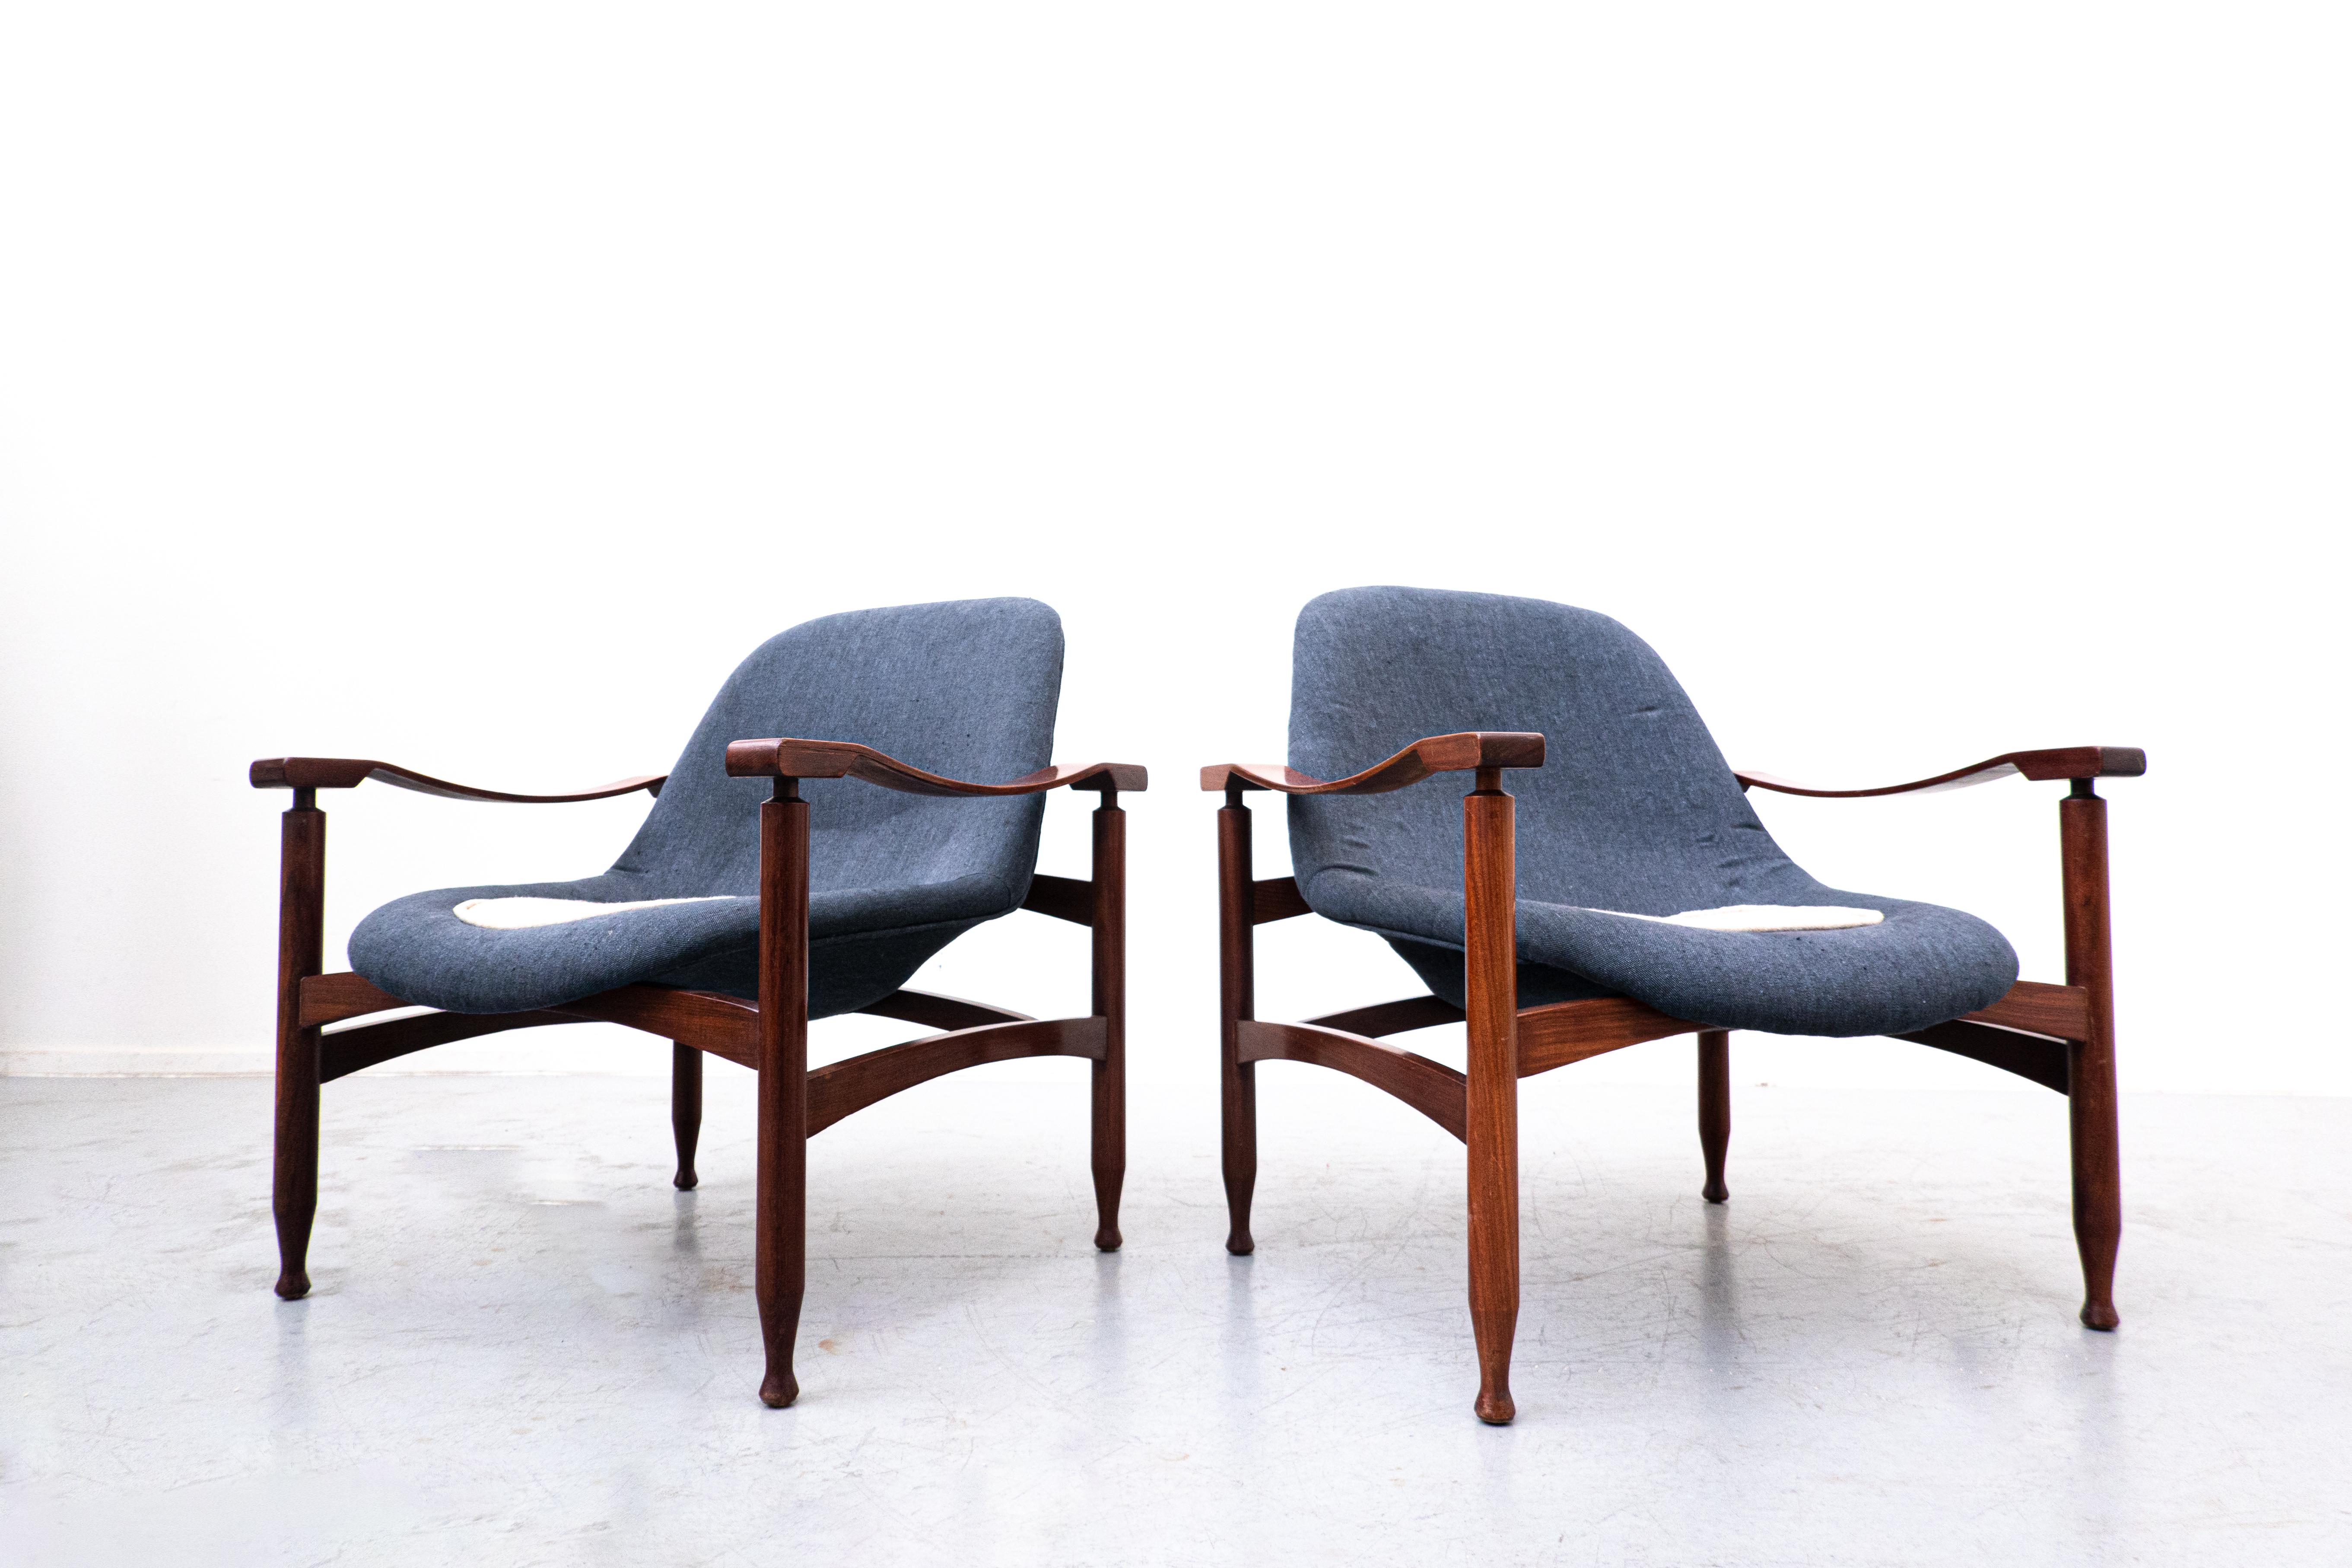 Italian Pair of Blue Armchairs by Jorge Zalszupin, Wood and Fabric, Brasil, 1960s For Sale